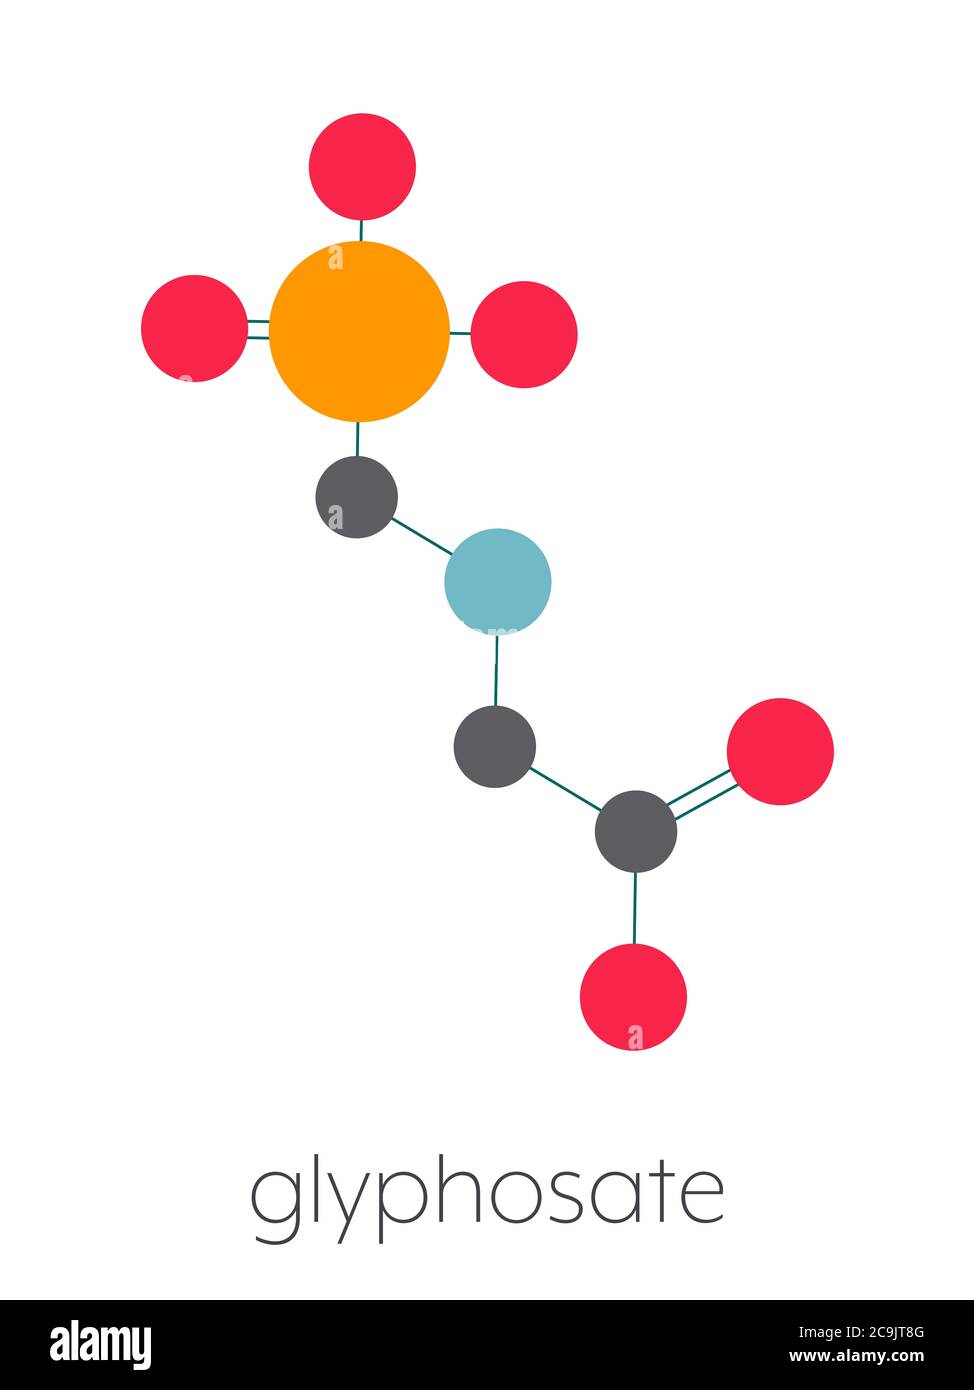 Glyphosate herbicide molecule. Crops resistant to glyphosate (genetically modified organisms, GMO) have been produced by genetic engineering. Stylized Stock Photo